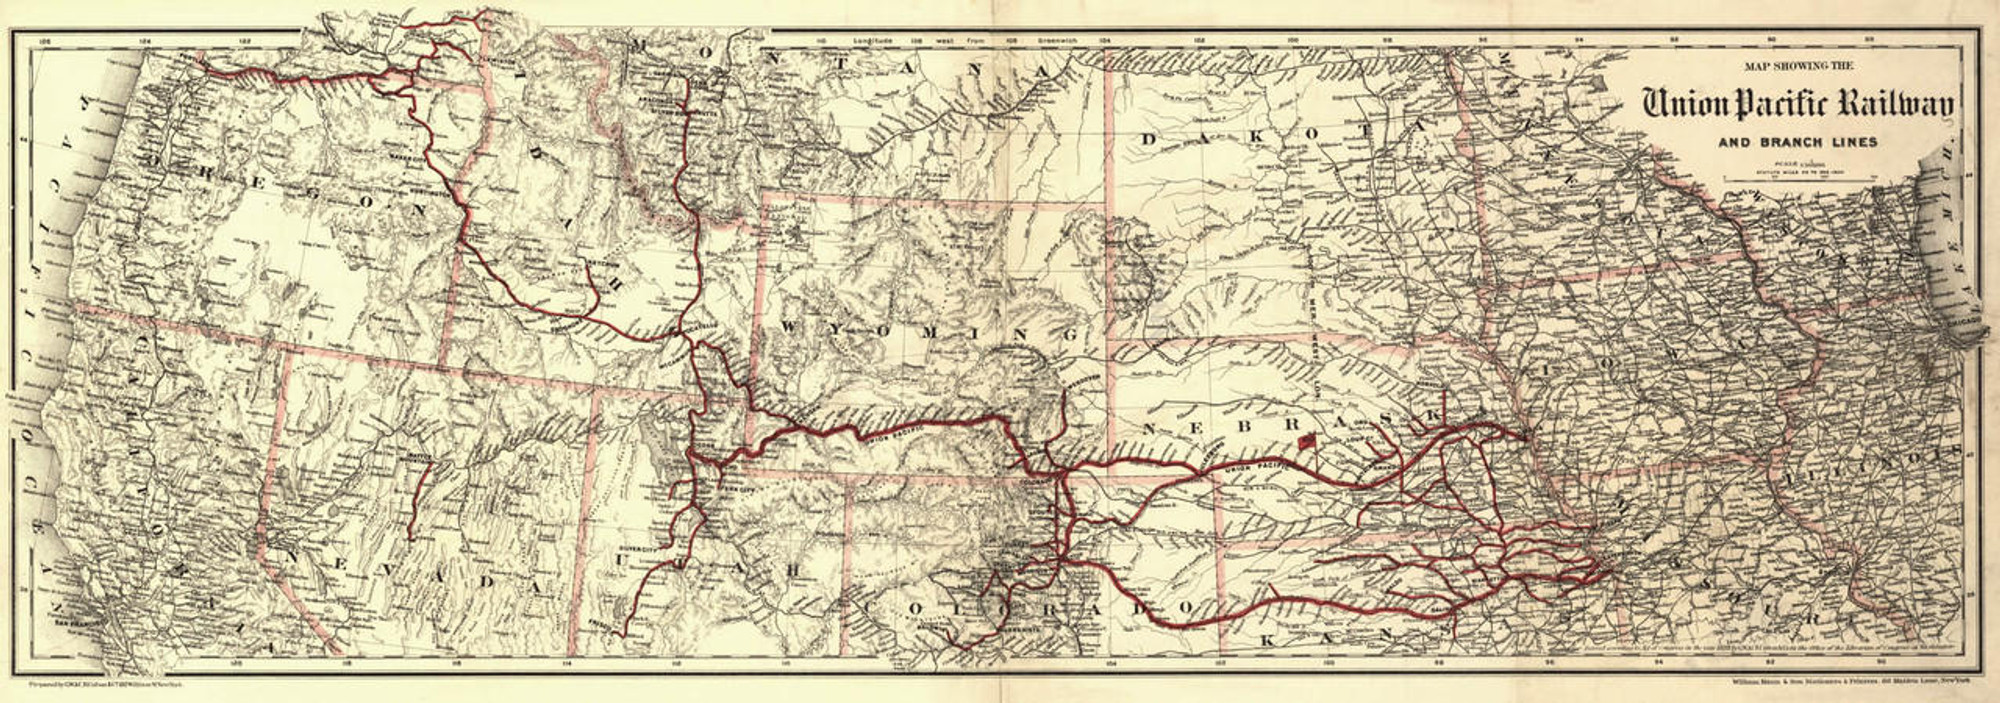 Historic Railroad Map of the Western United States - 1888, image 1, World Maps Online